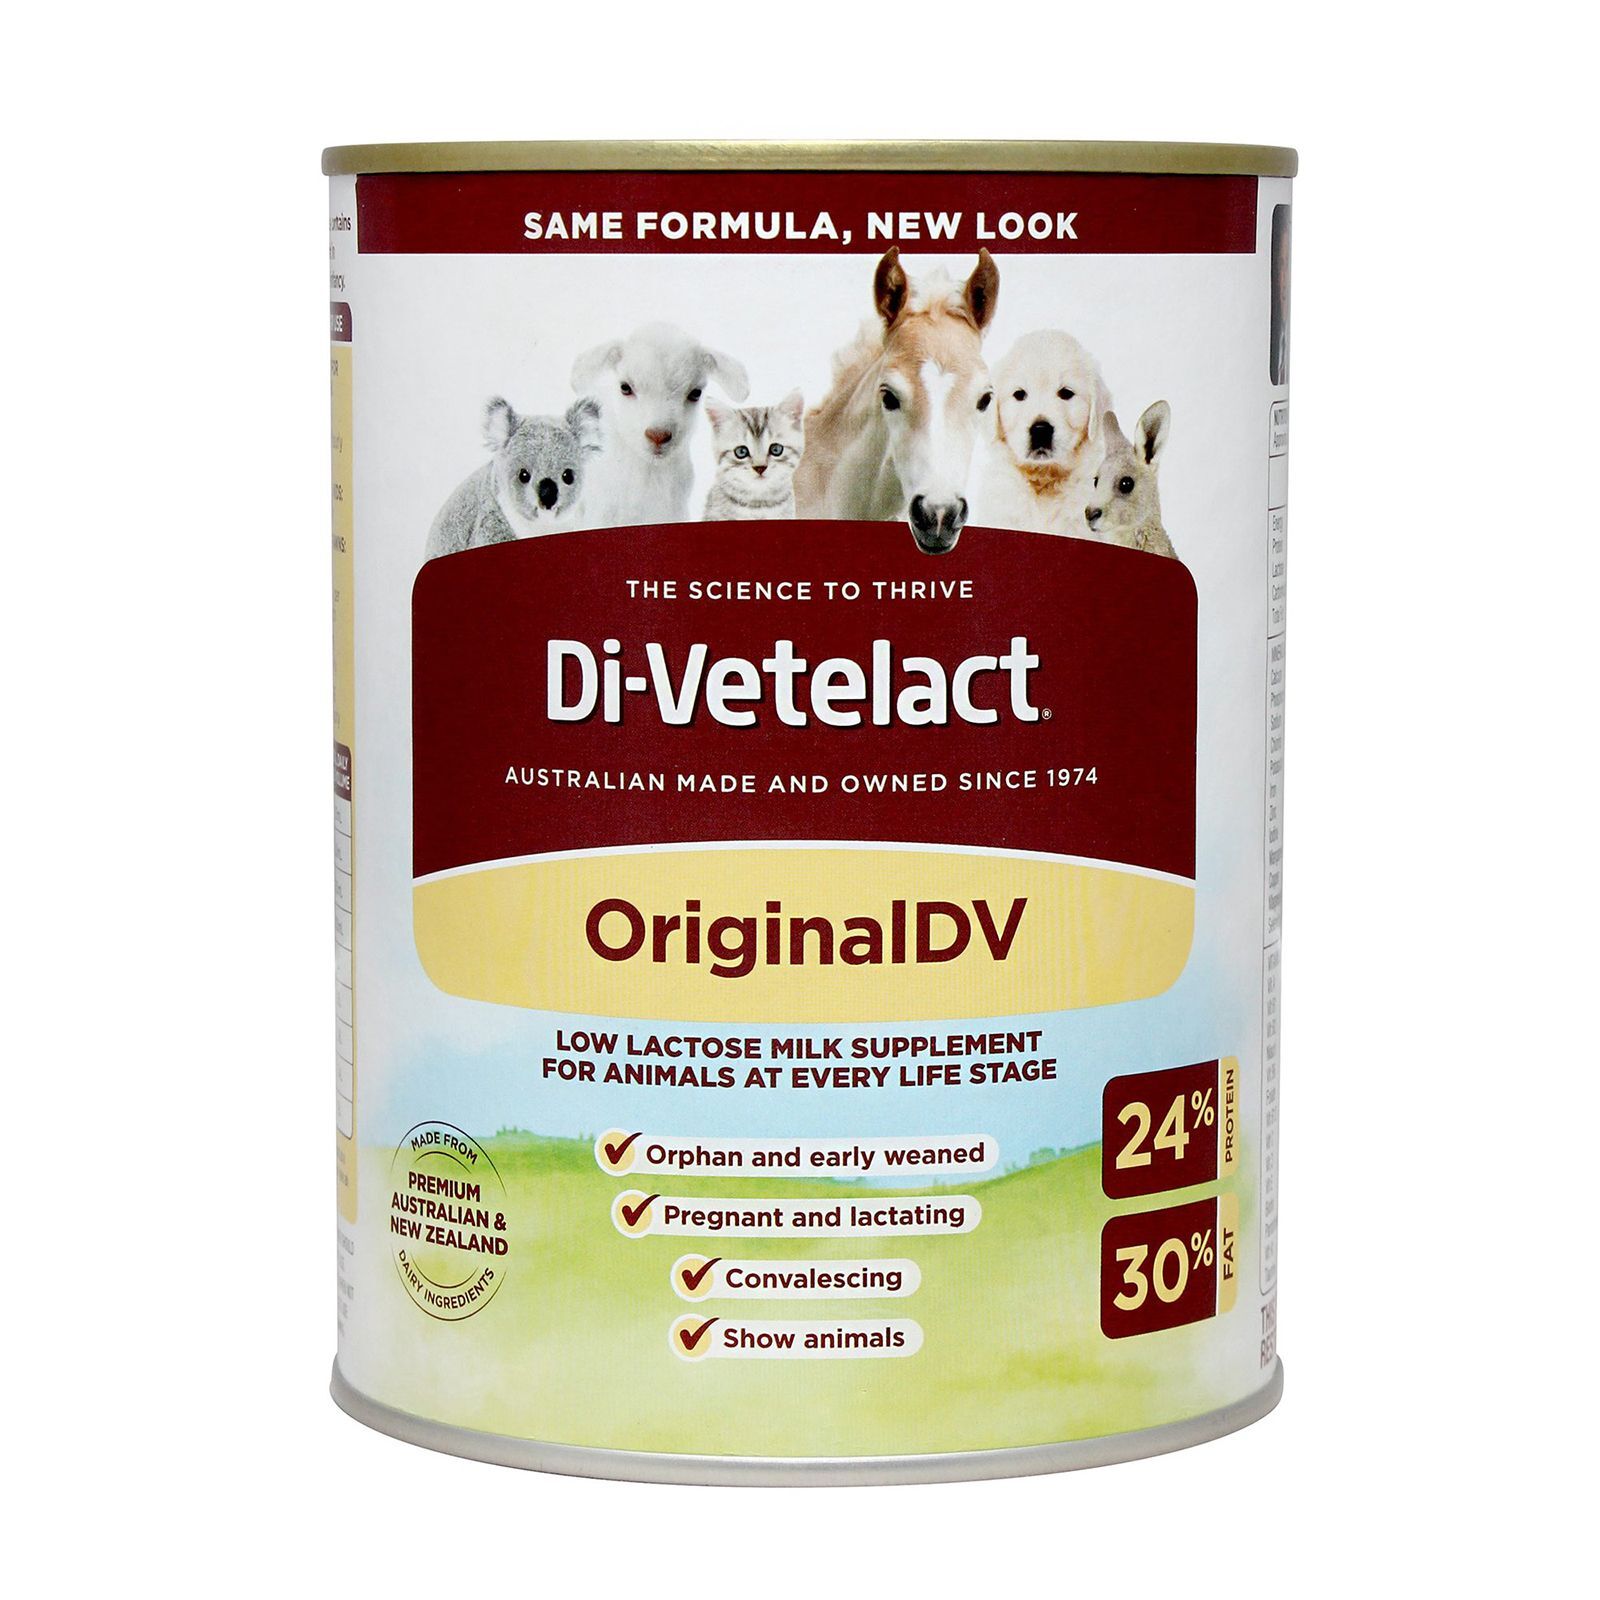 Di-Vetelact Nutritional Supplement and Milk replacer for Pets image 0